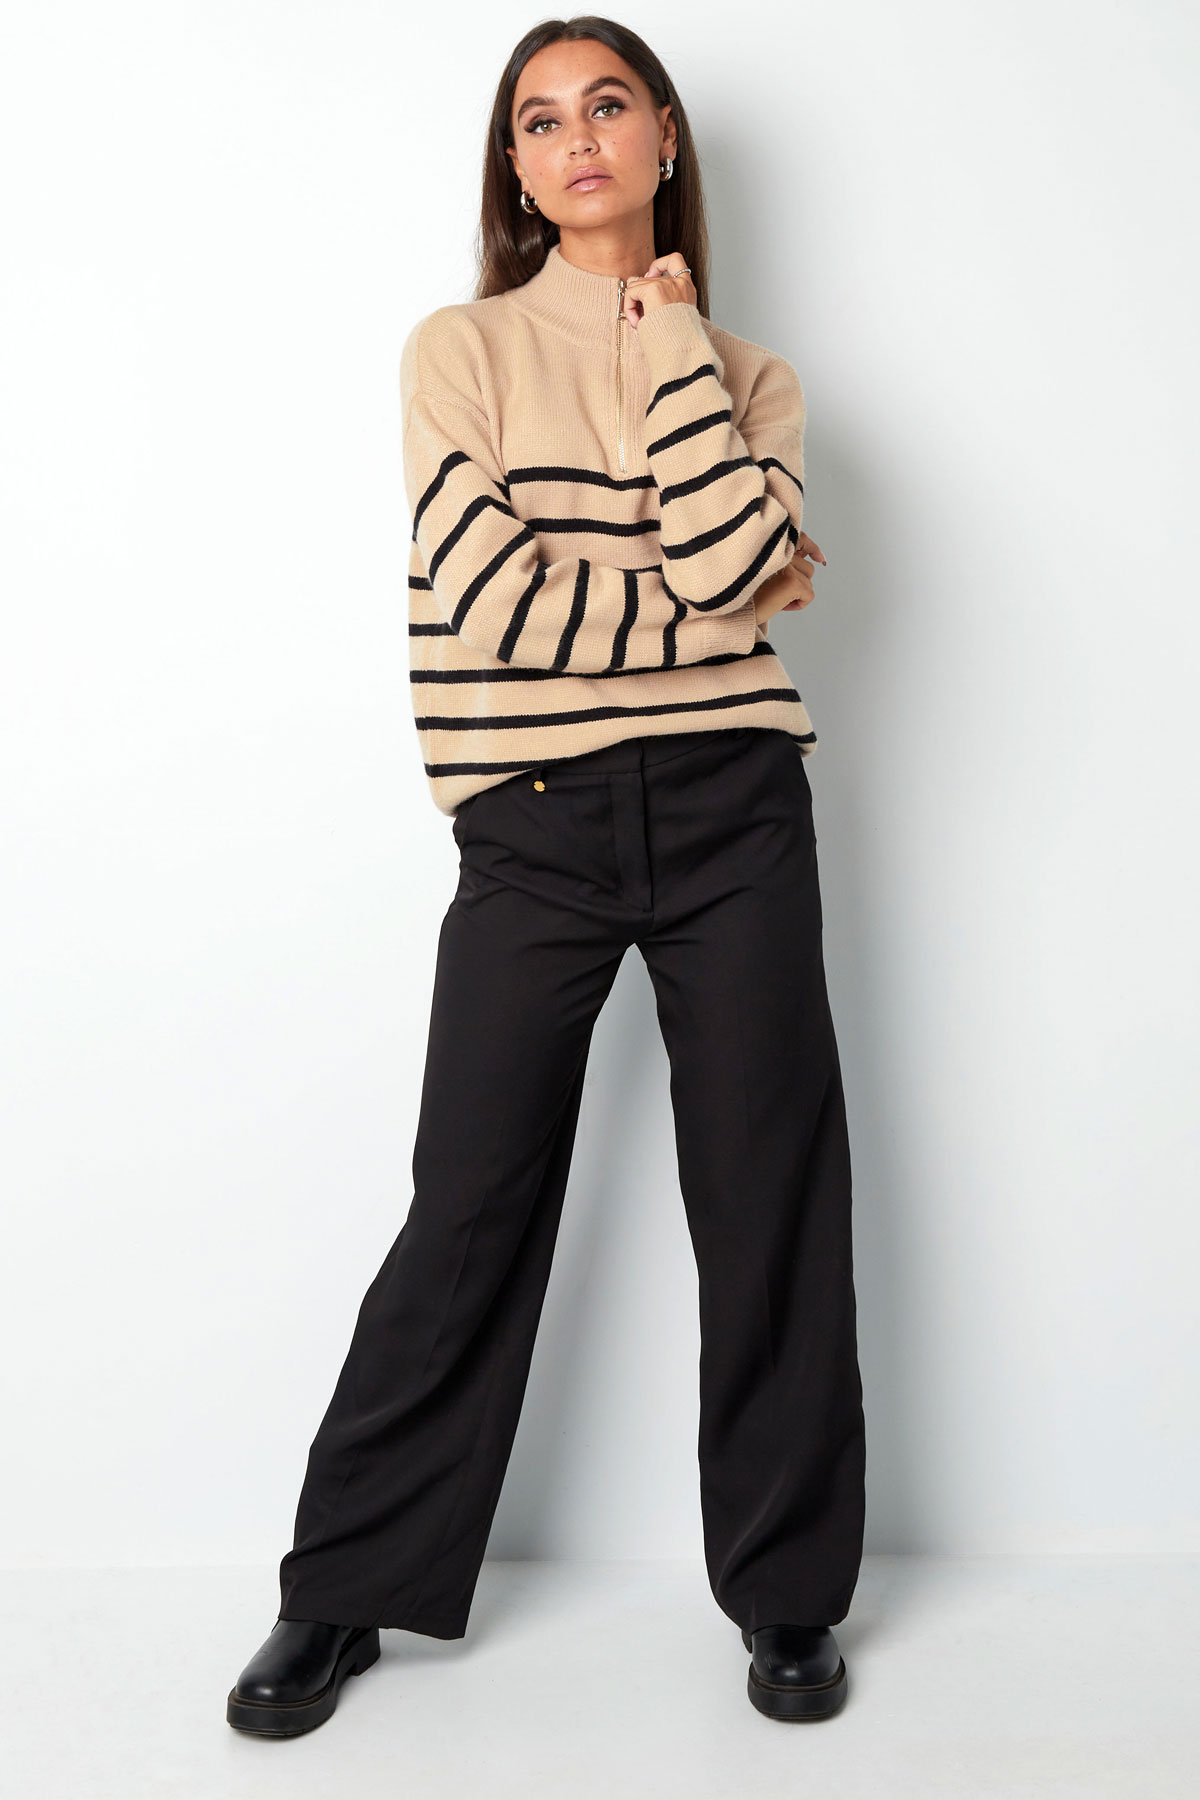 Knitted sweater stripe with zipper - black and white Picture8